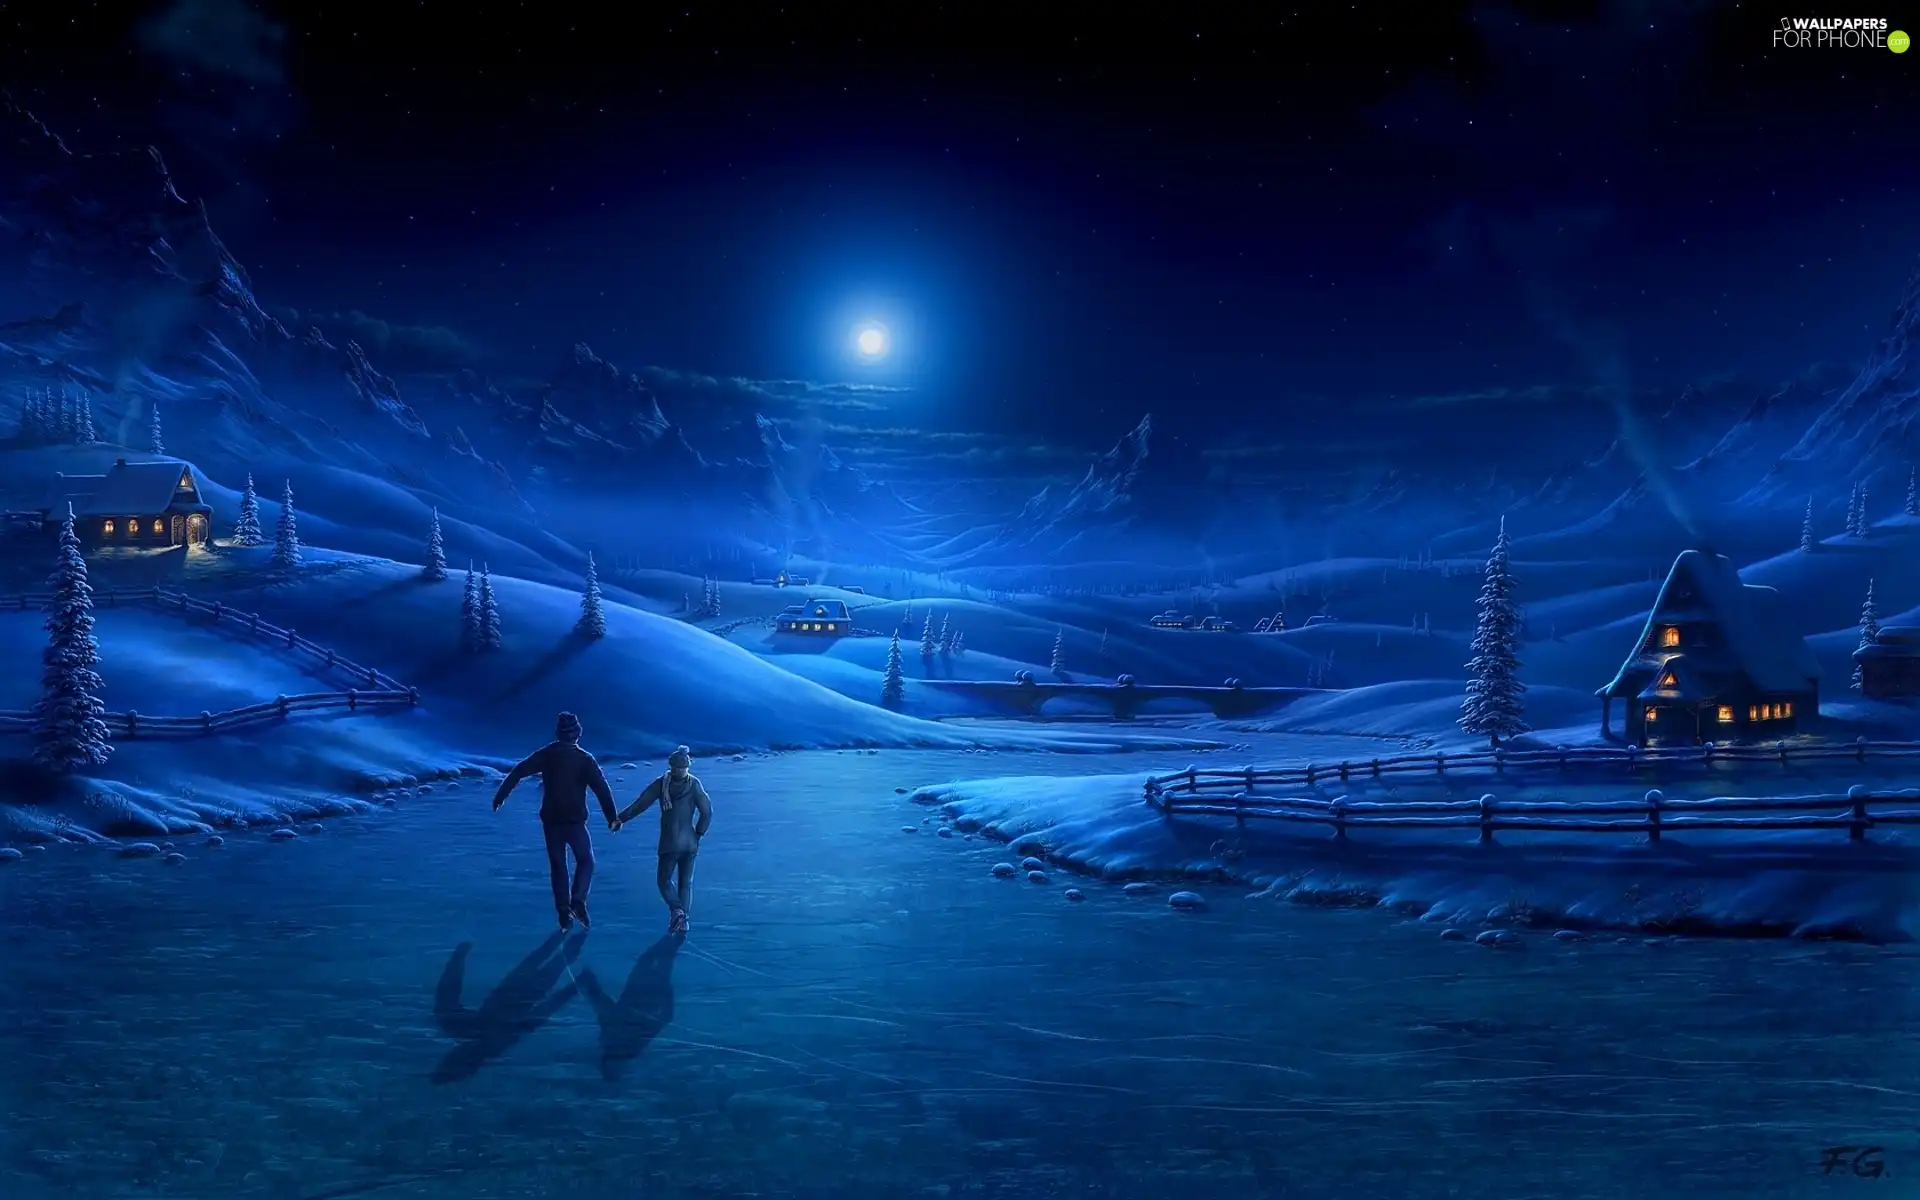 Frozen, winter, skaters, Mountains, River, Night